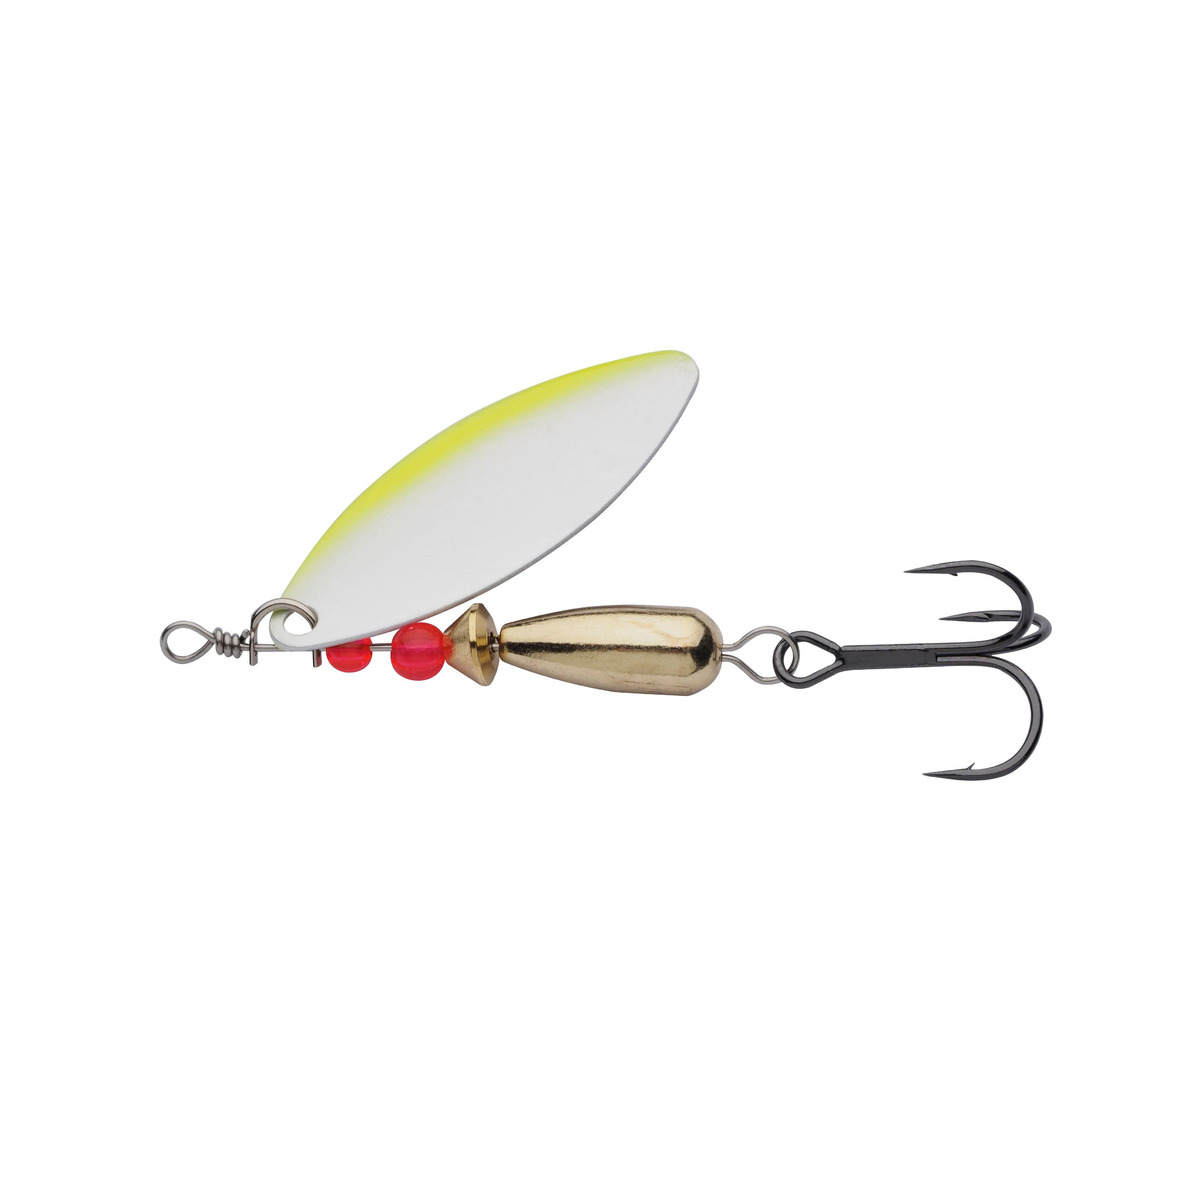 Abu Garcia Droppen Vide Spinners 7 G - Chartreuse Pearl Holo - 55 mm